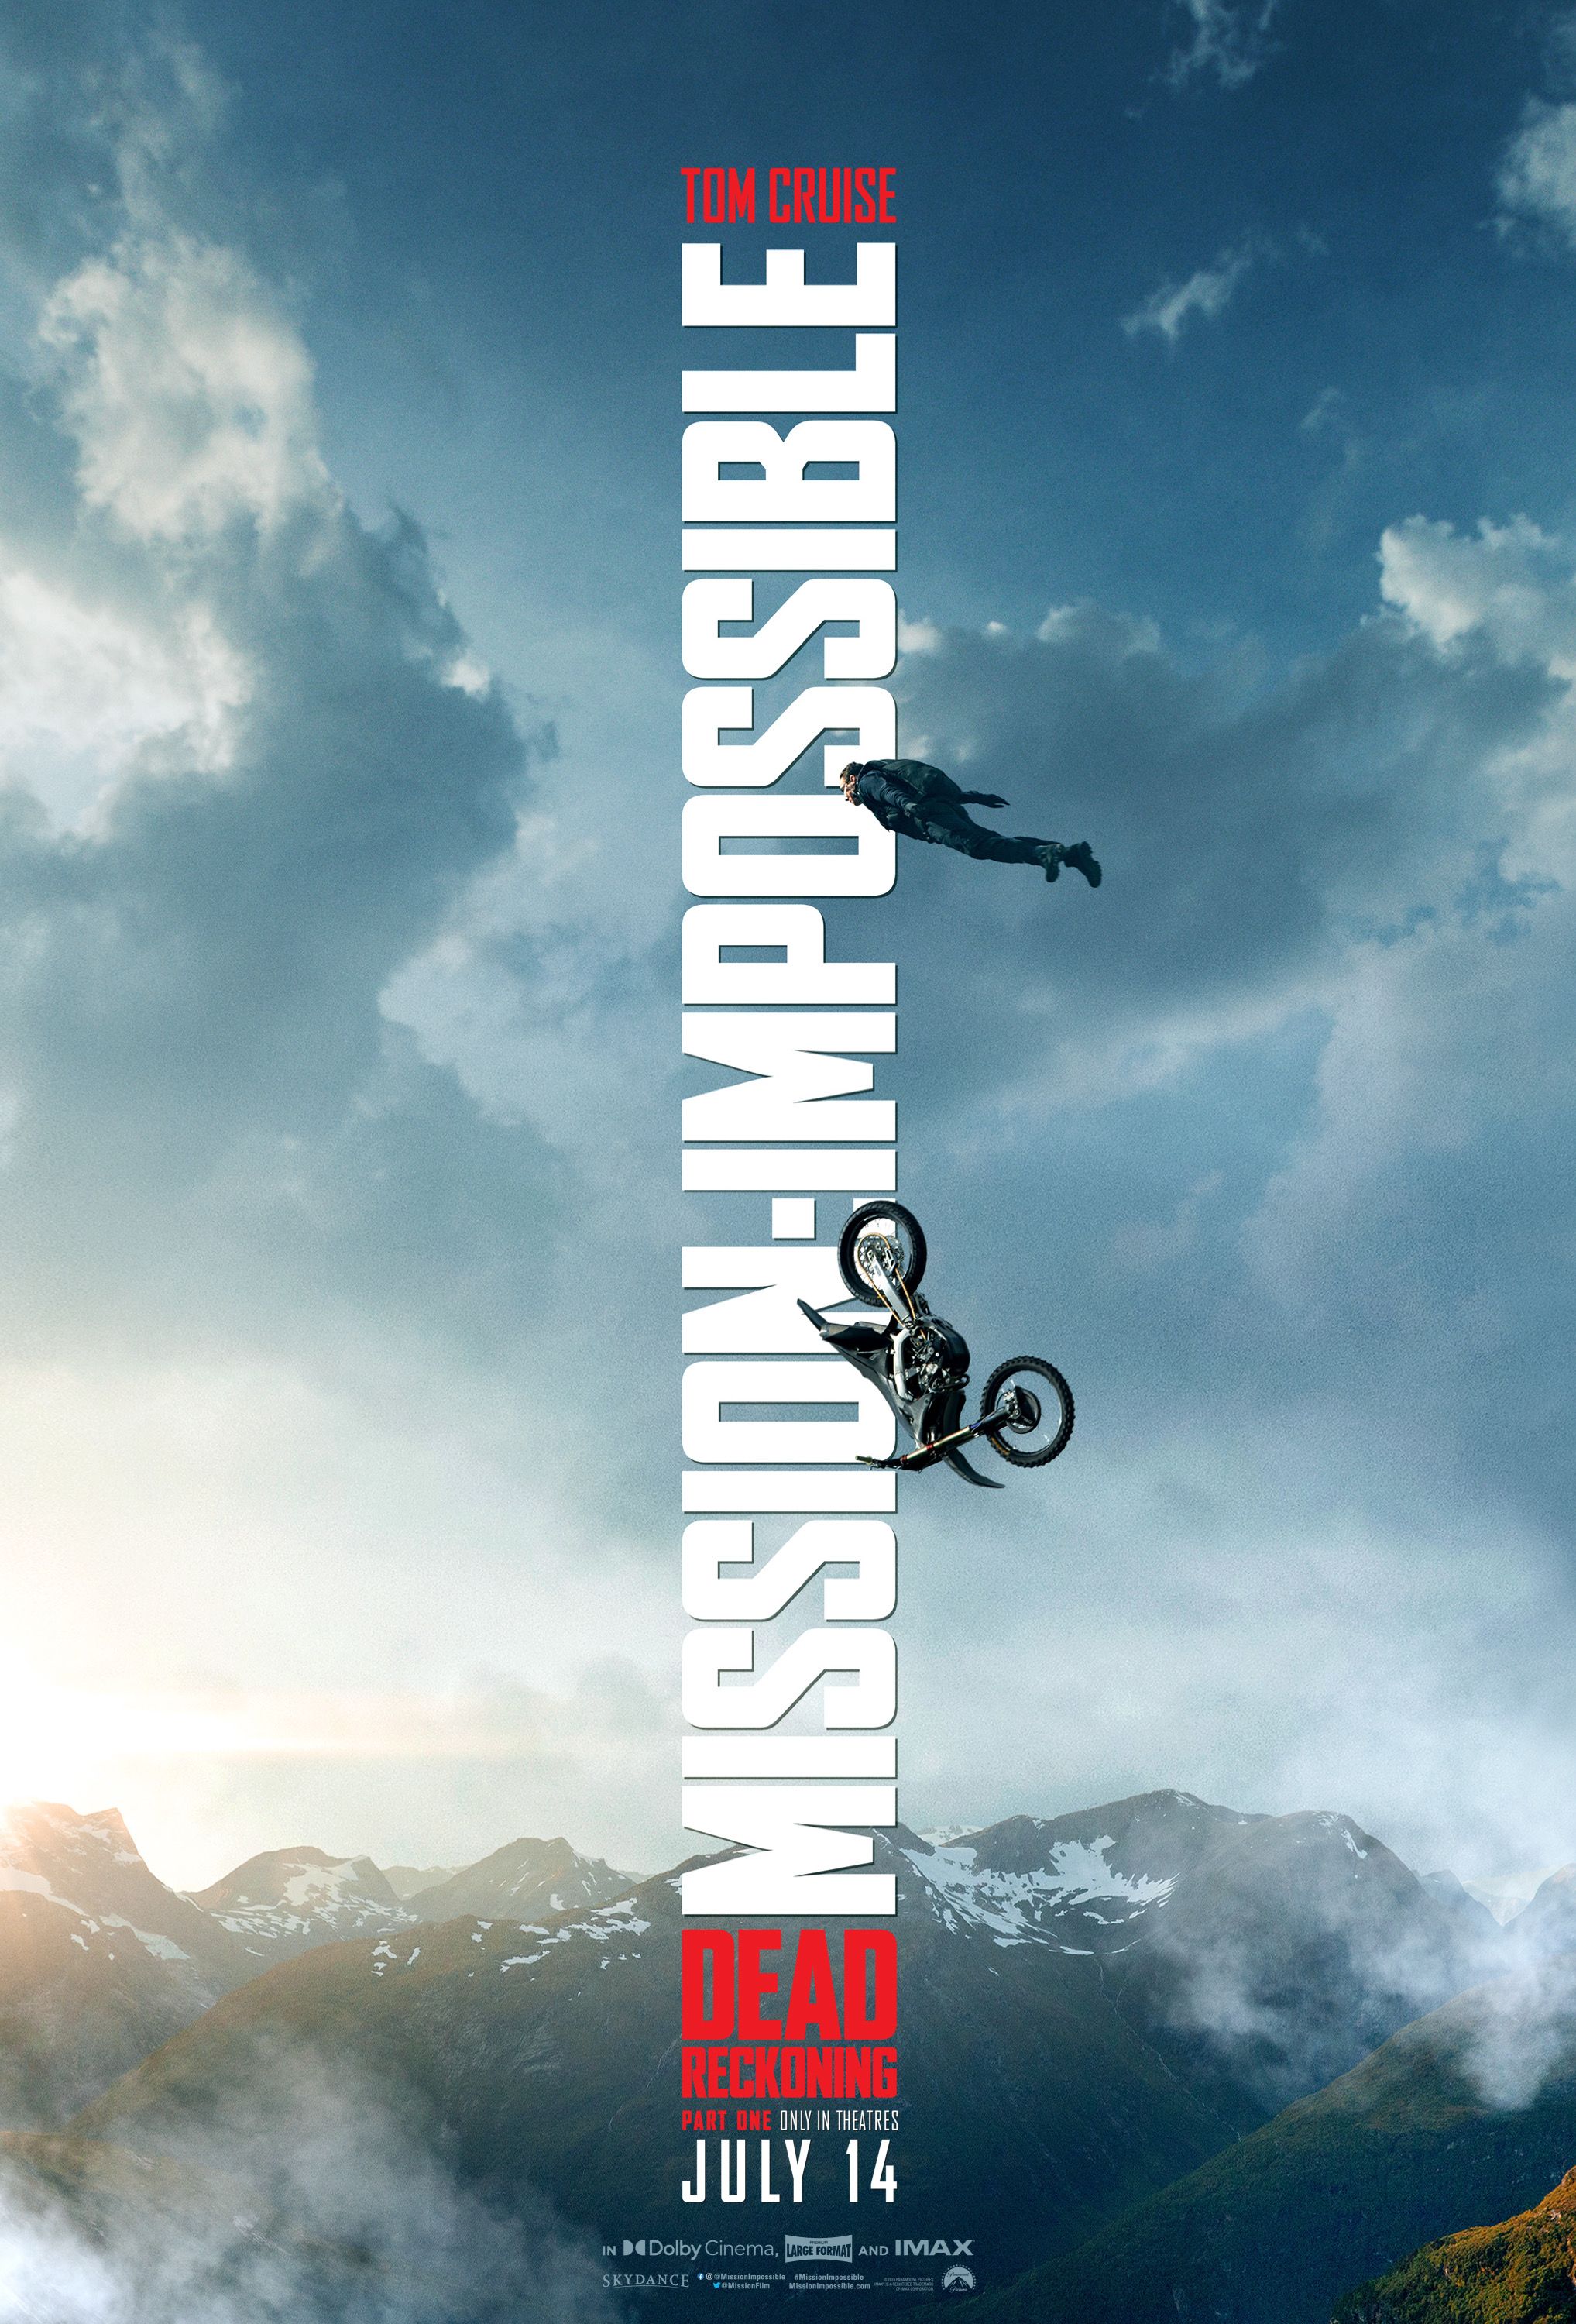 mission impossible 7 poster 